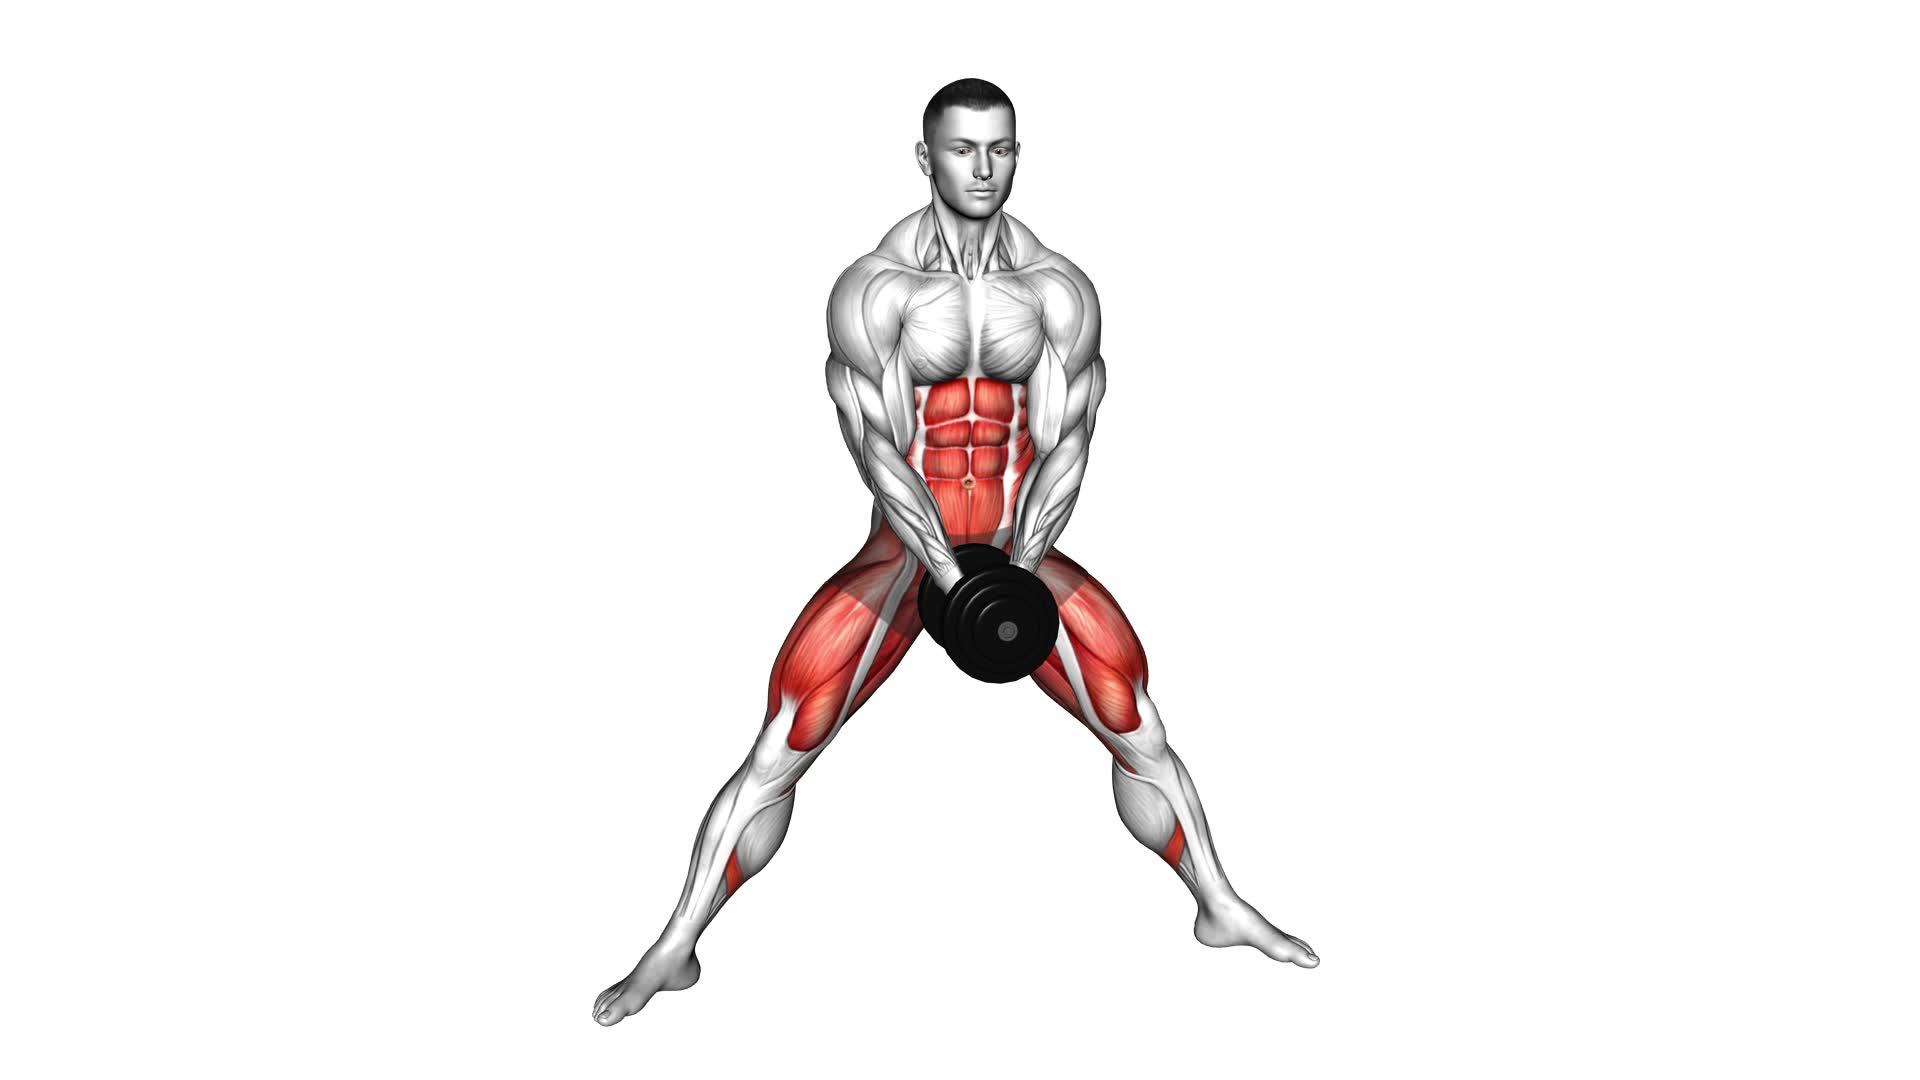 Dumbbell Change Plyo Side Lunge (male) - Video Exercise Guide & Tips